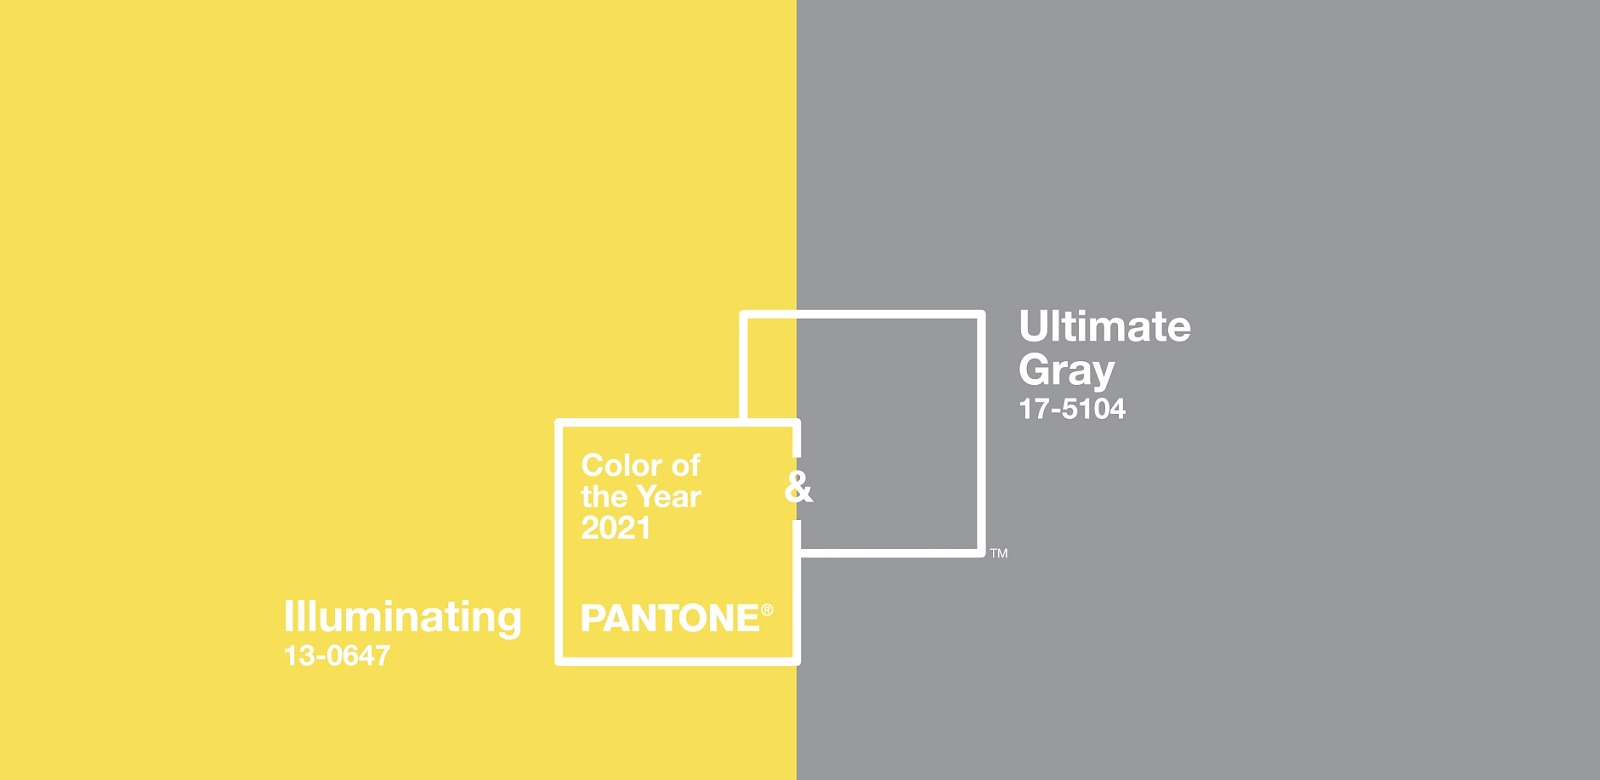 PANTONE-color-of-the-year-2021.png [89.14 KB]